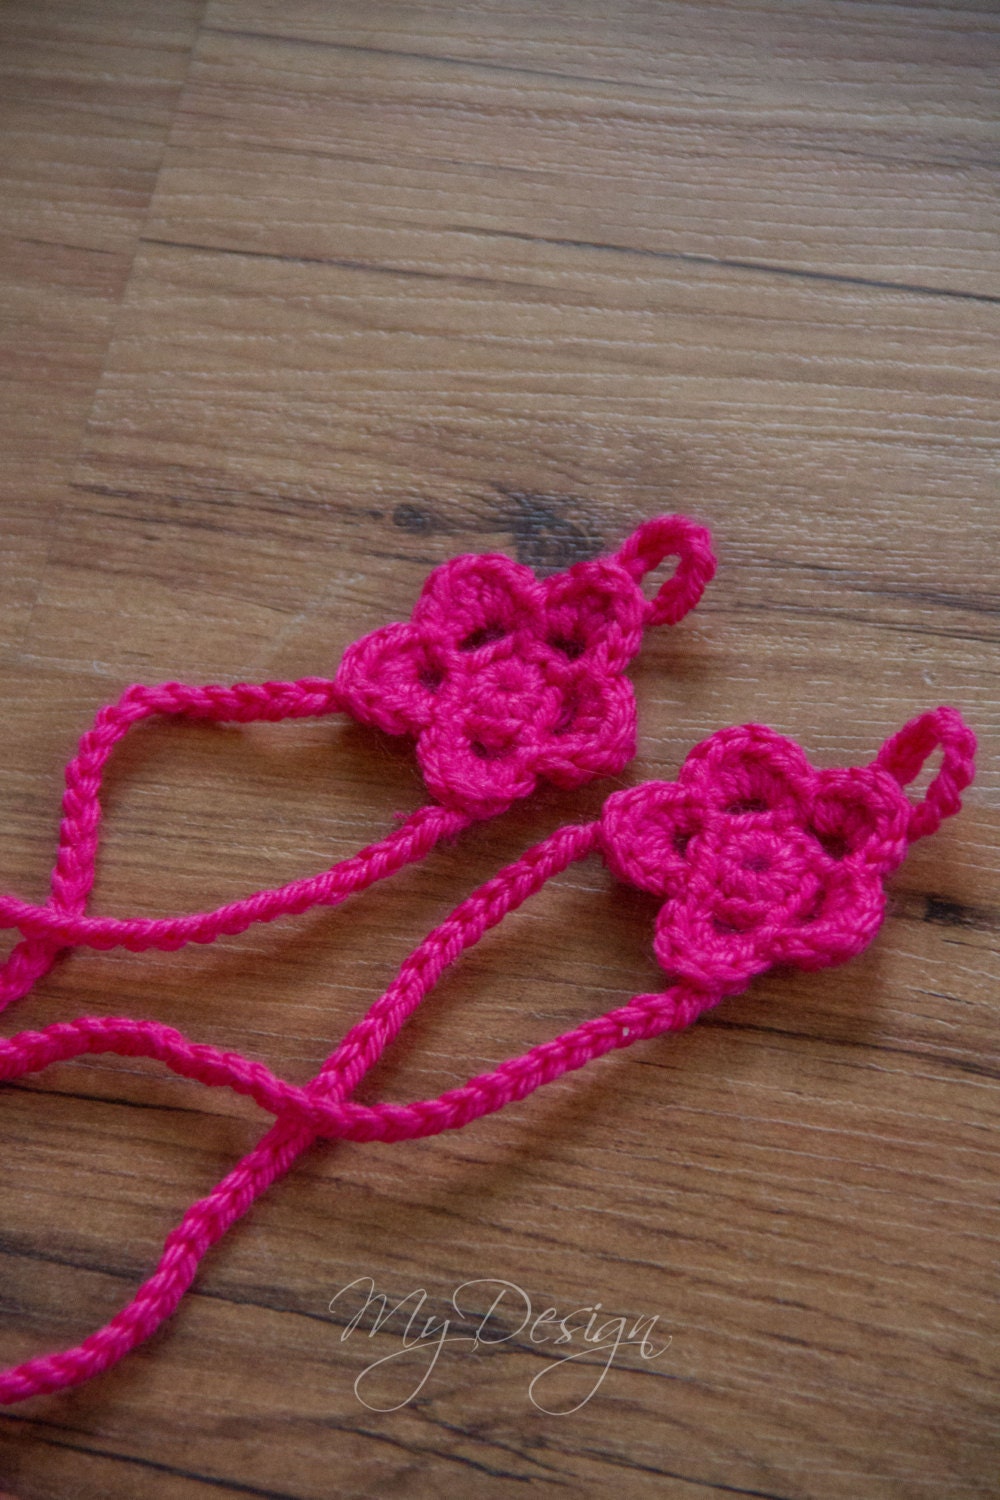 Crochet Baby Barefoot Flower Sandals by thecuteasabutton on Etsy